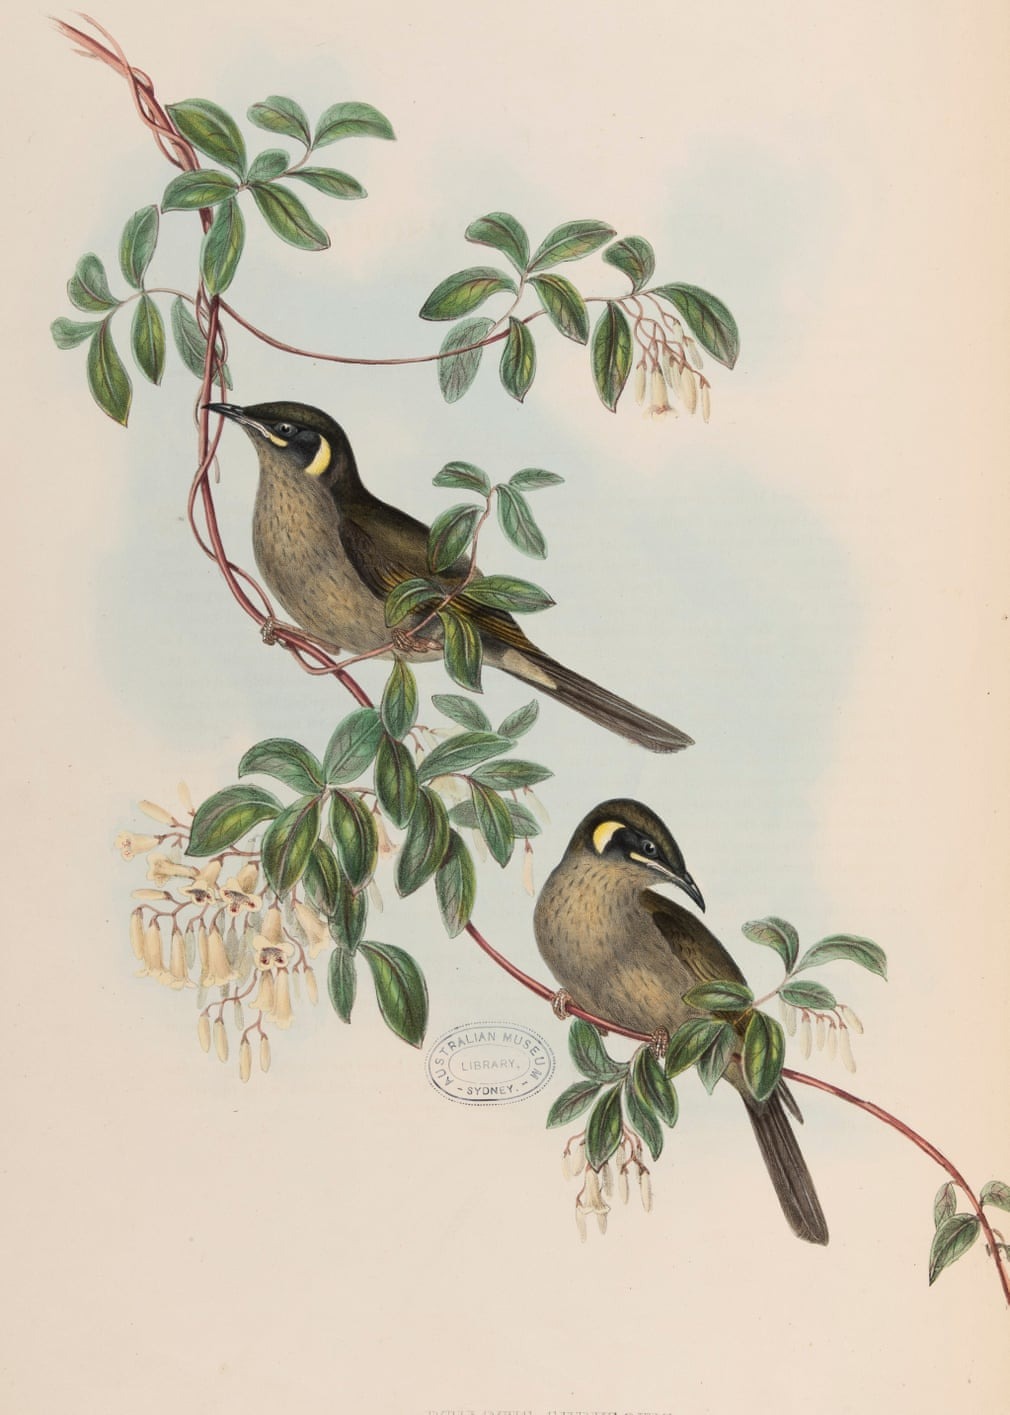 Birds Of Australia, Fascinating Illustrations From The 19th Century By Elizabeth Gould (3)